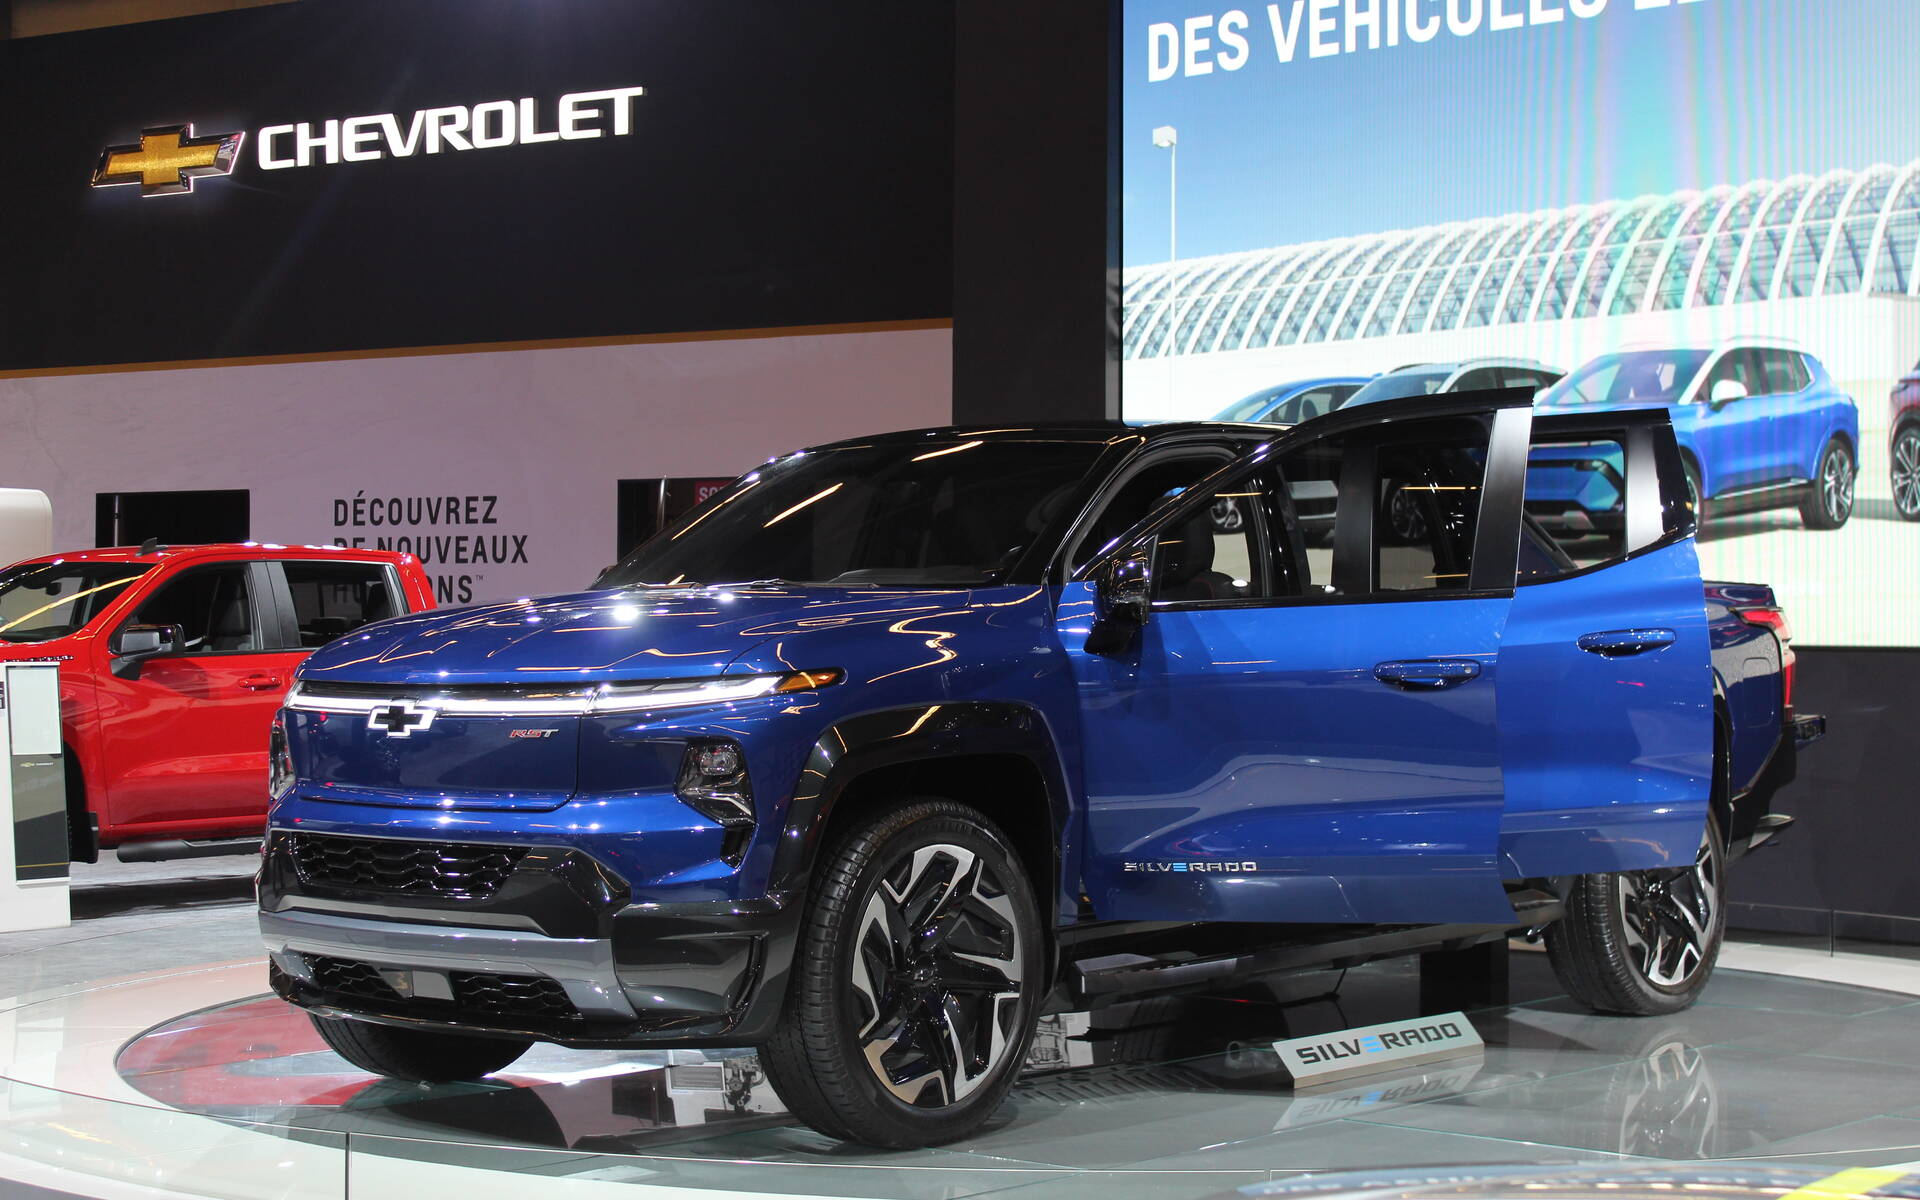 GM delays production of its electric pickup trucks